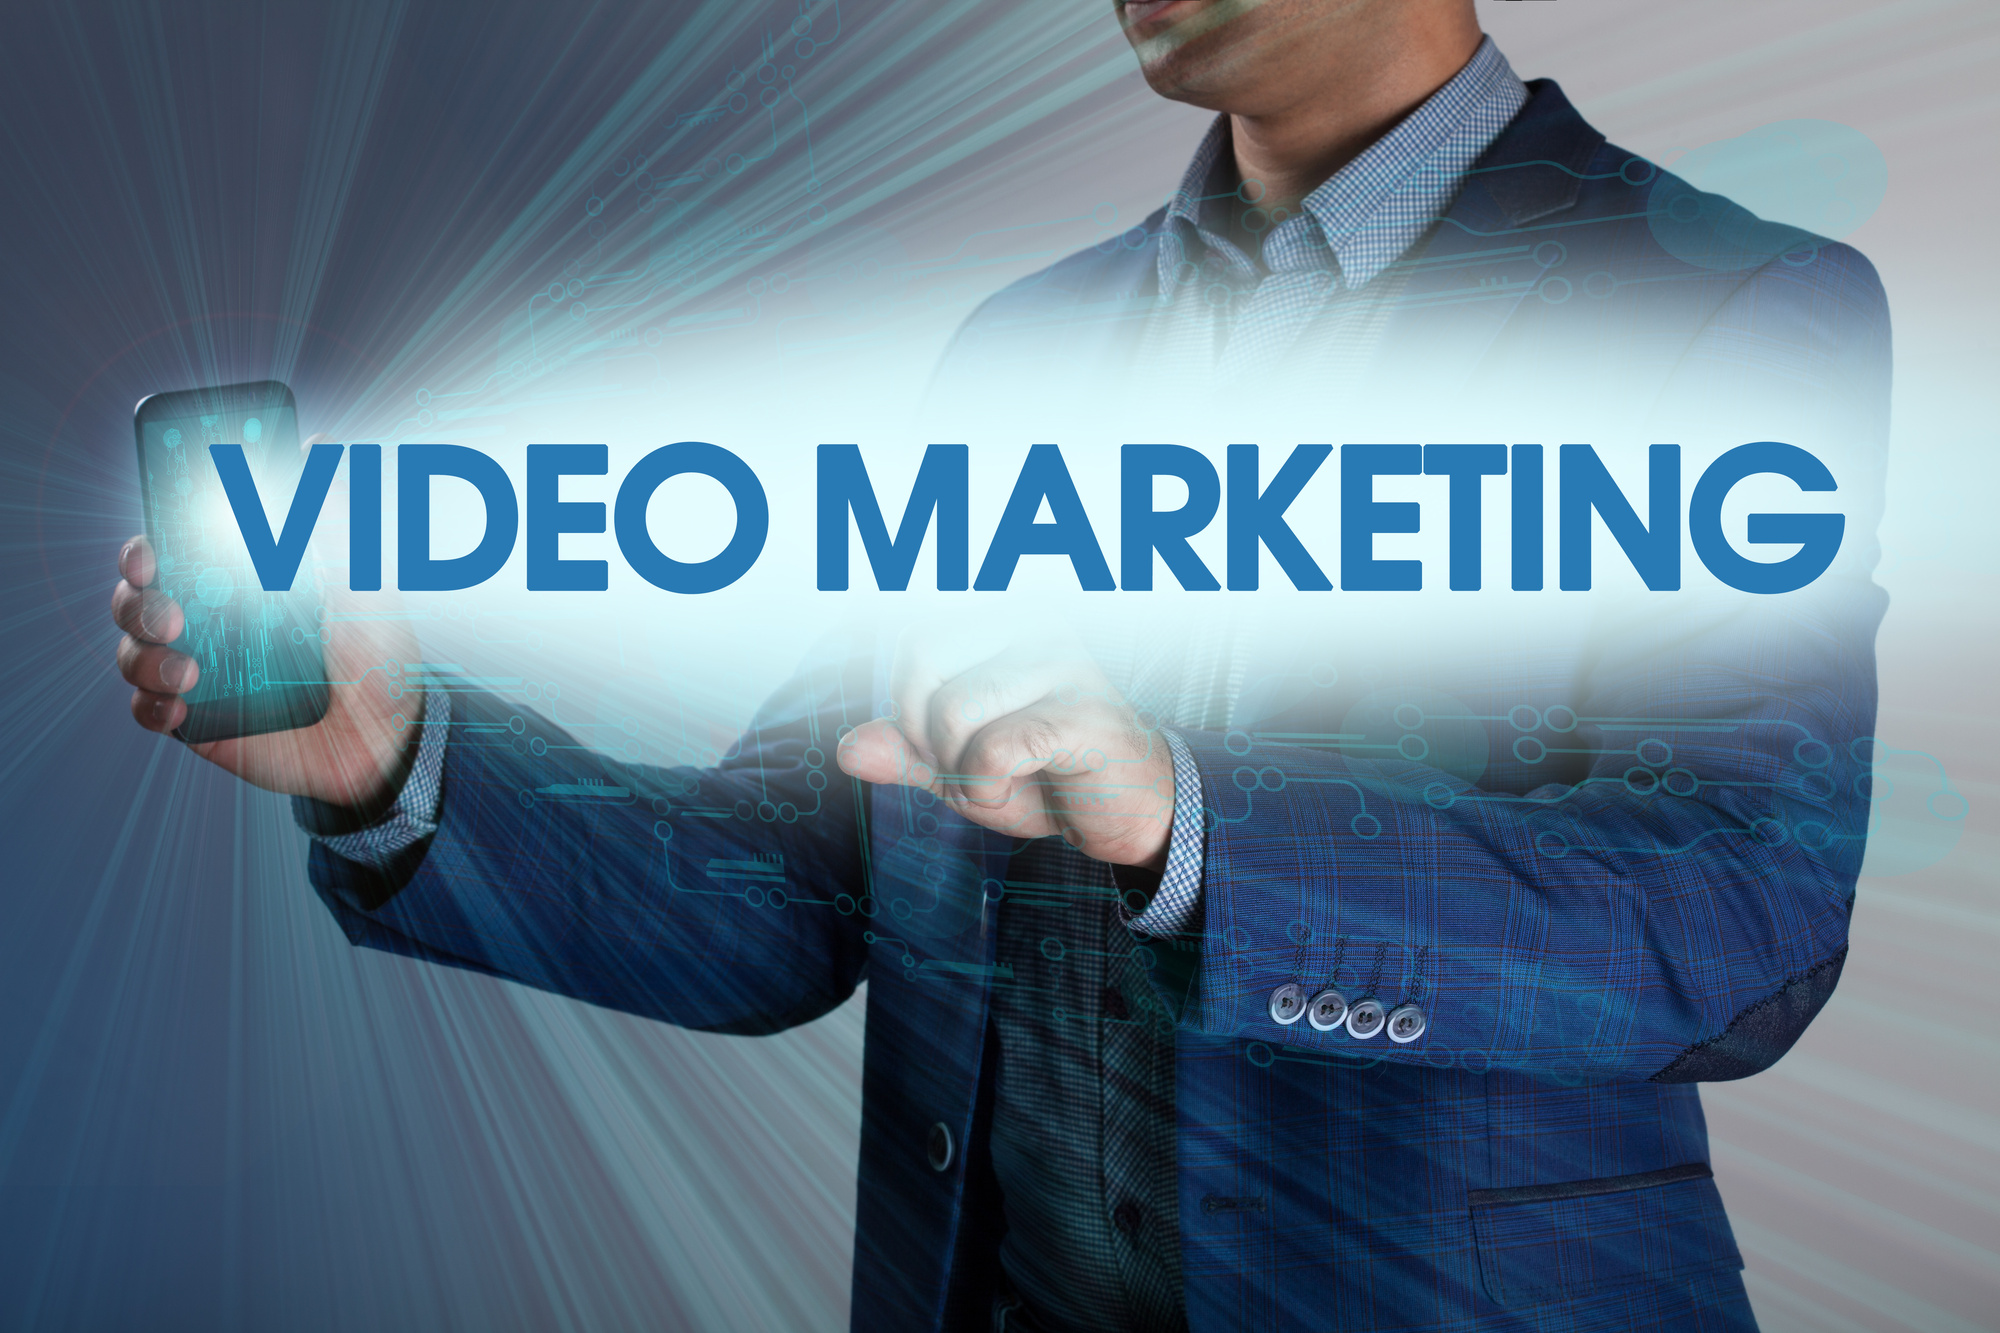 Video Marketing Tips: What’s the Optimal Length for a Marketing Video?